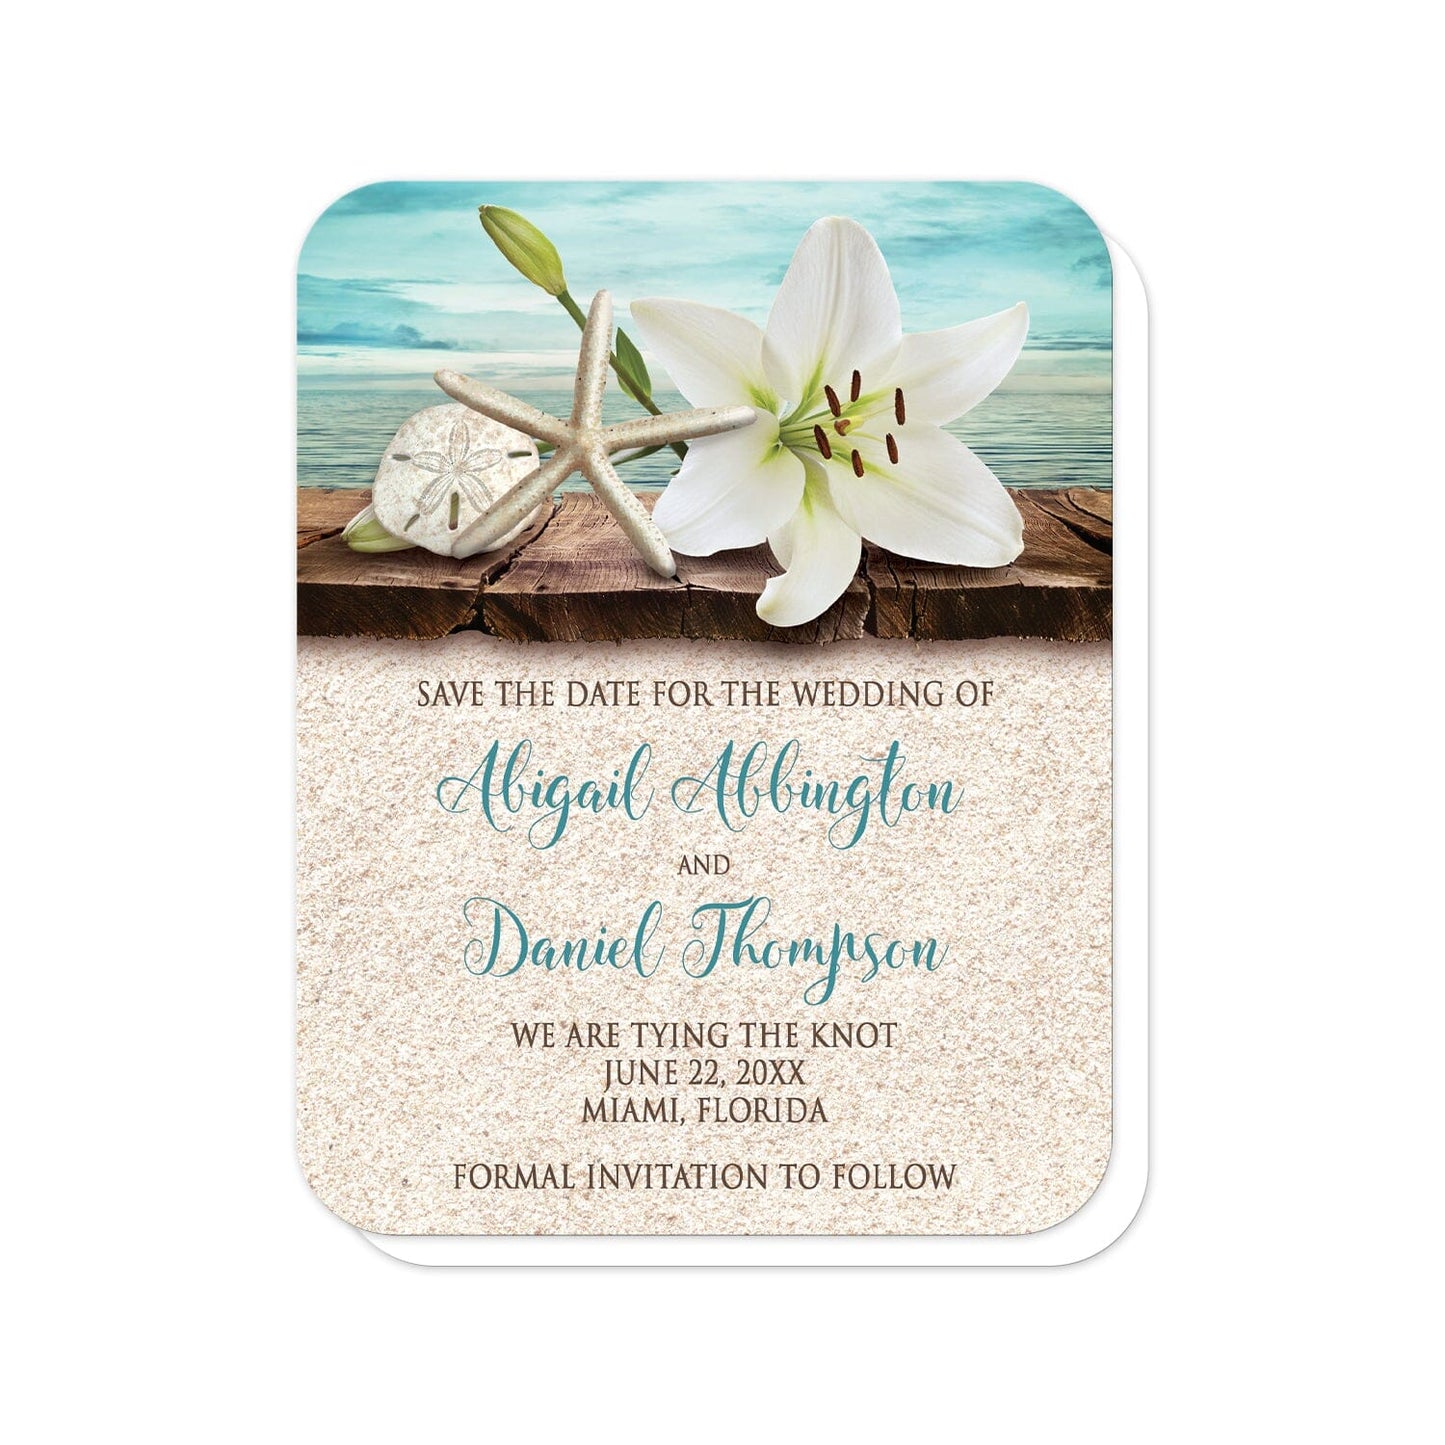  Lily Seashells and Sand Beach Save the Date Cards (with rounded corners) at Artistically Invited. Beautiful tropical lily seashells and sand beach save the date cards with an elegant white lily, a starfish, and a sand dollar on a rustic wood dock overlooking the open water. Your personalized wedding announcement date details printed in dark brown and teal over a beige sand background design.